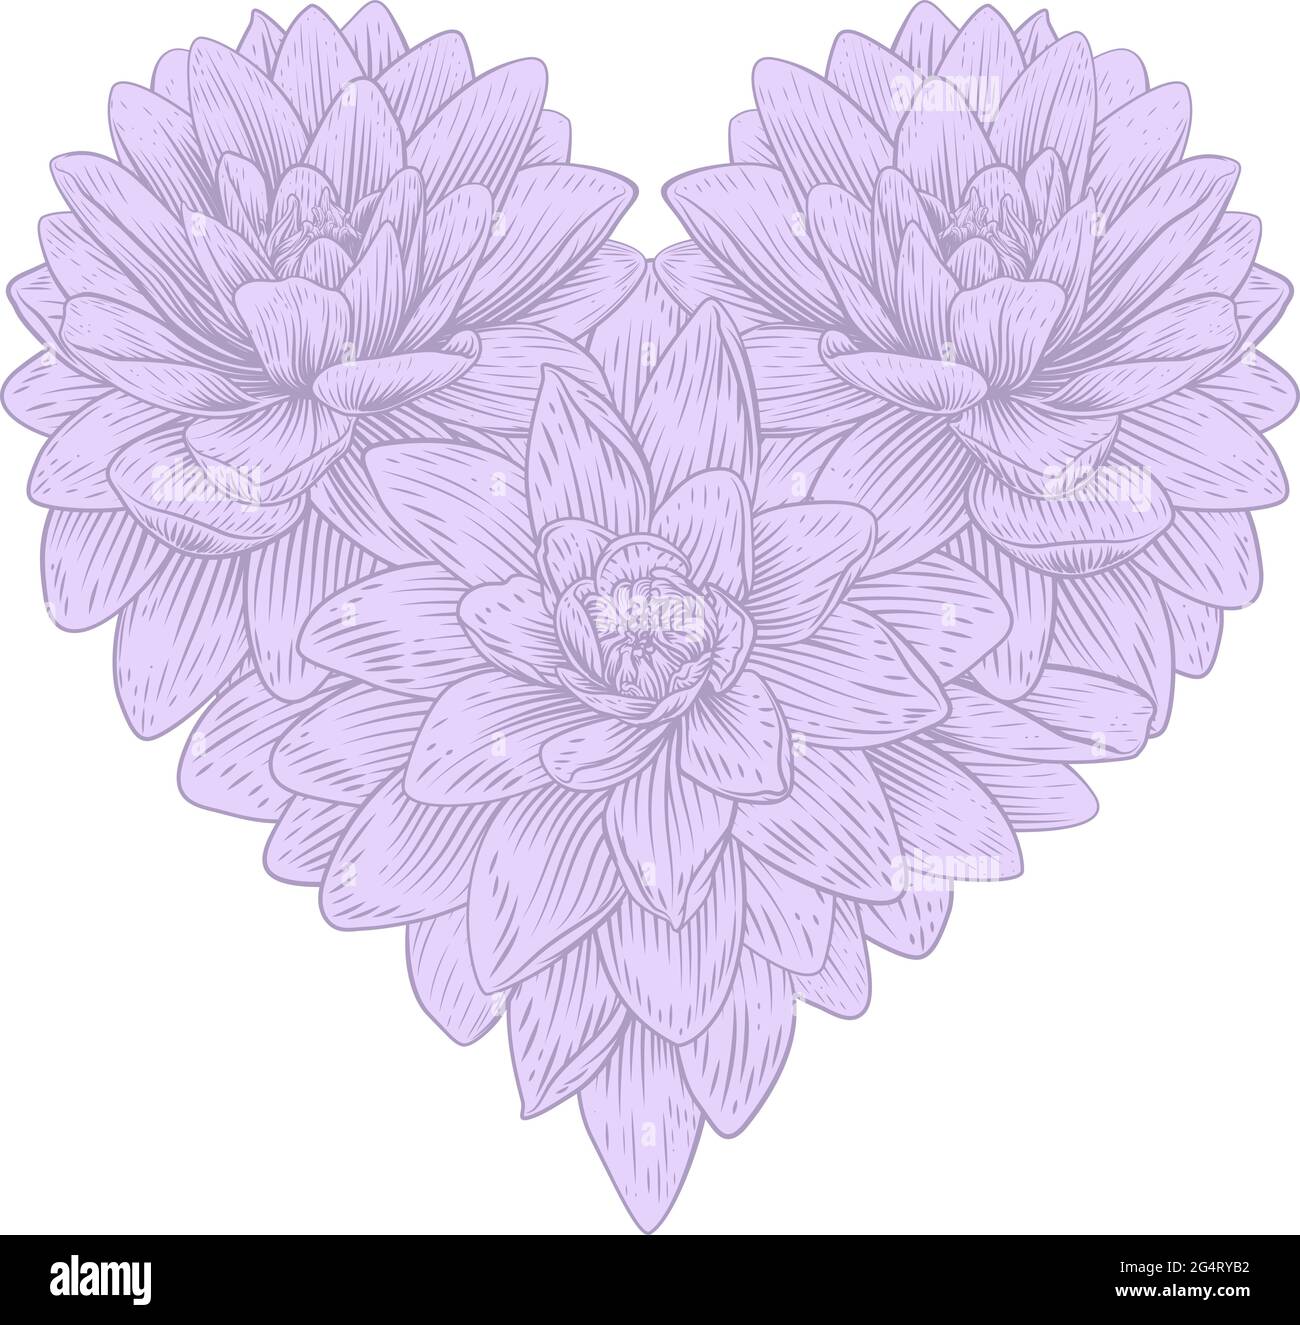 Heart Lotus Flower Love Floral Lilly Etching Stock Vector